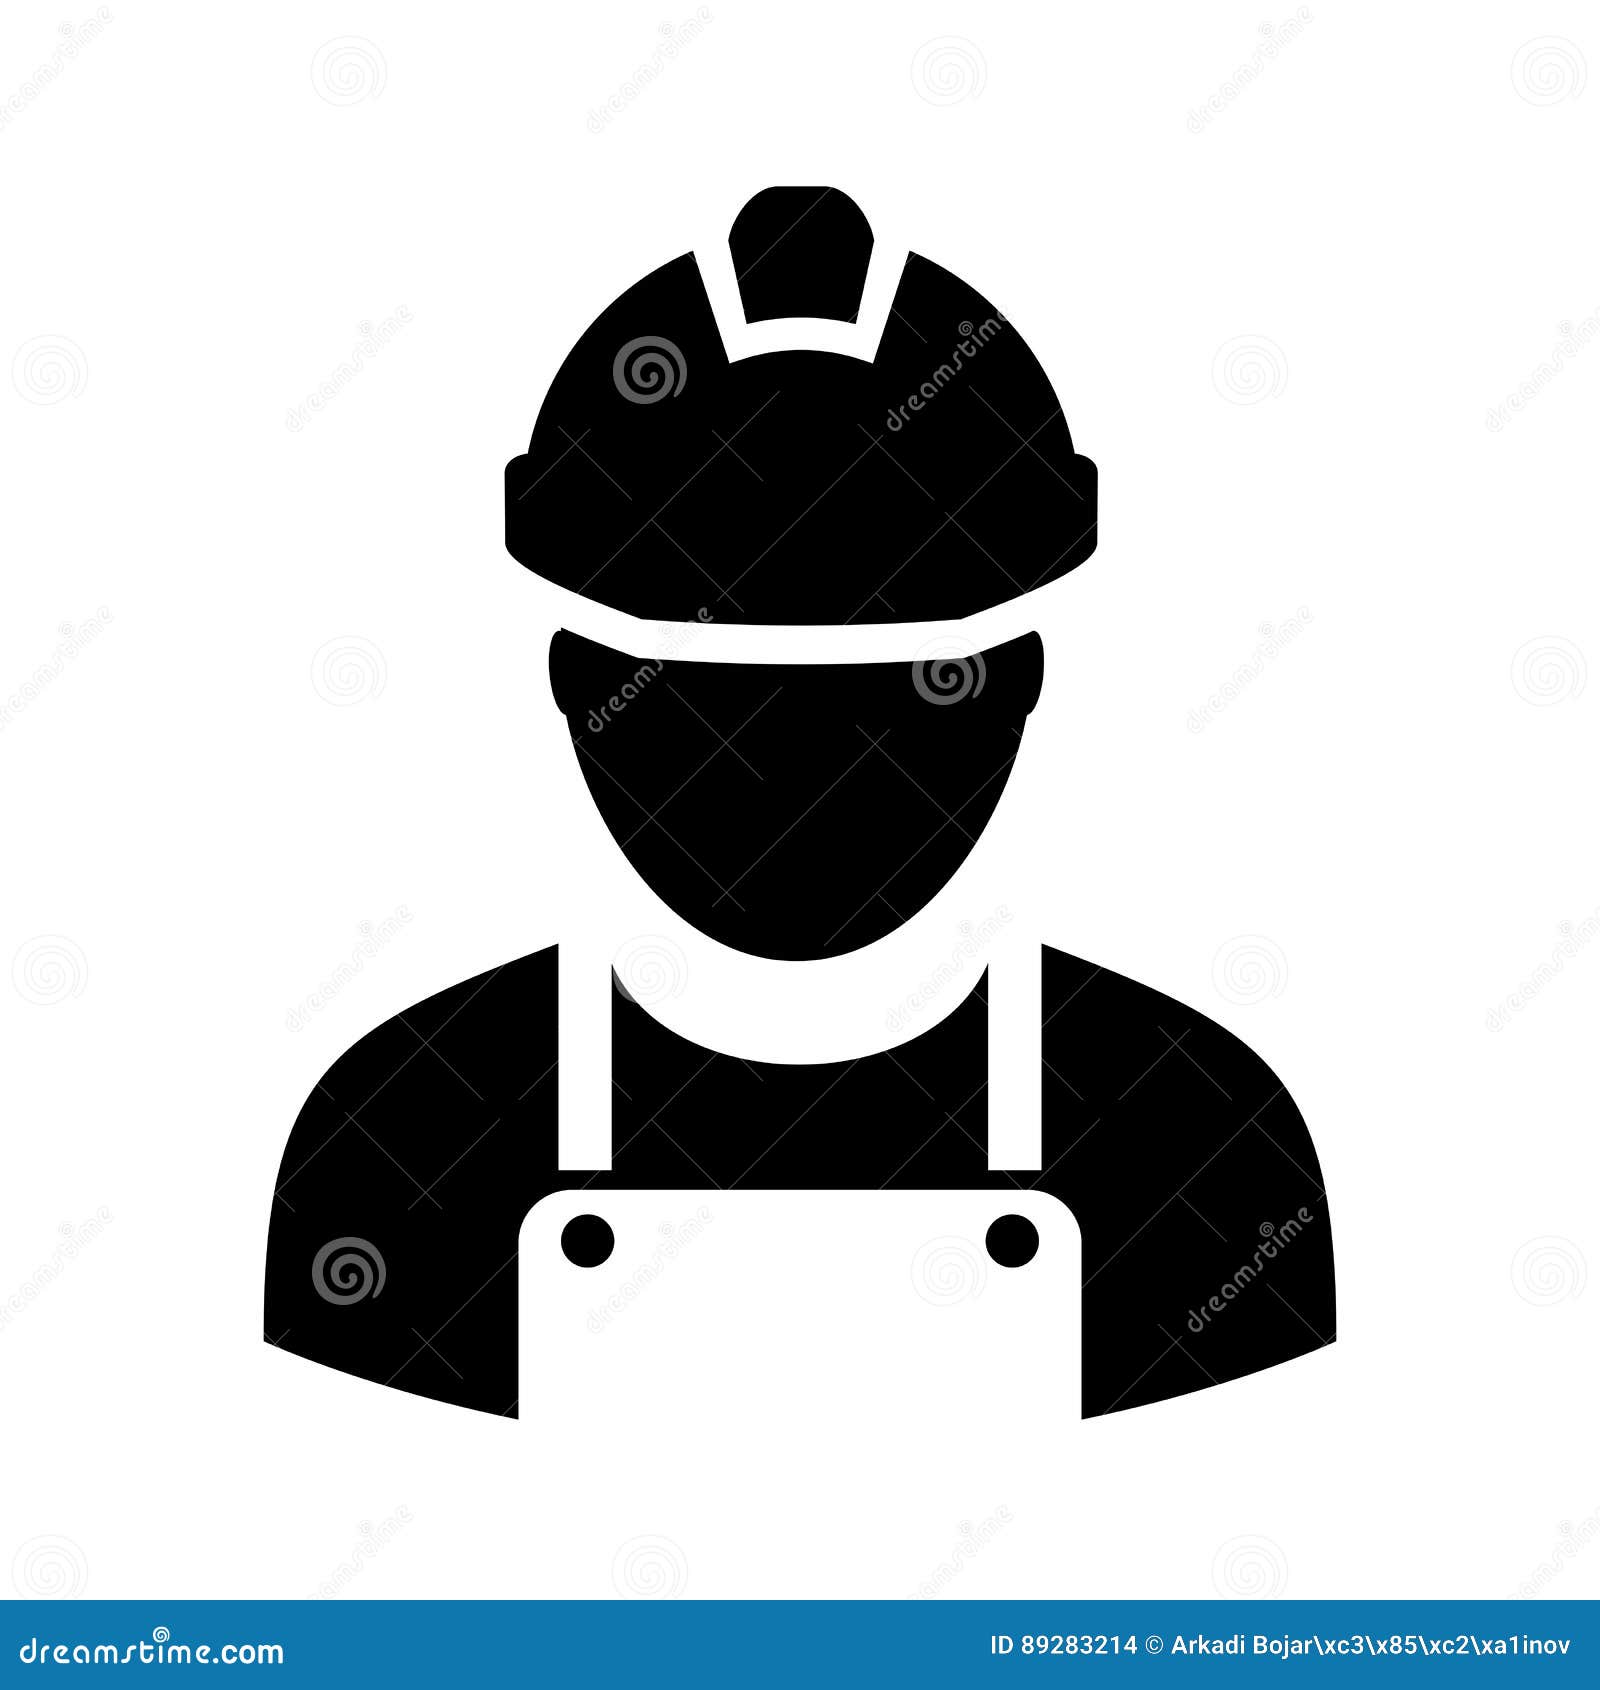 worker with hard hat icon